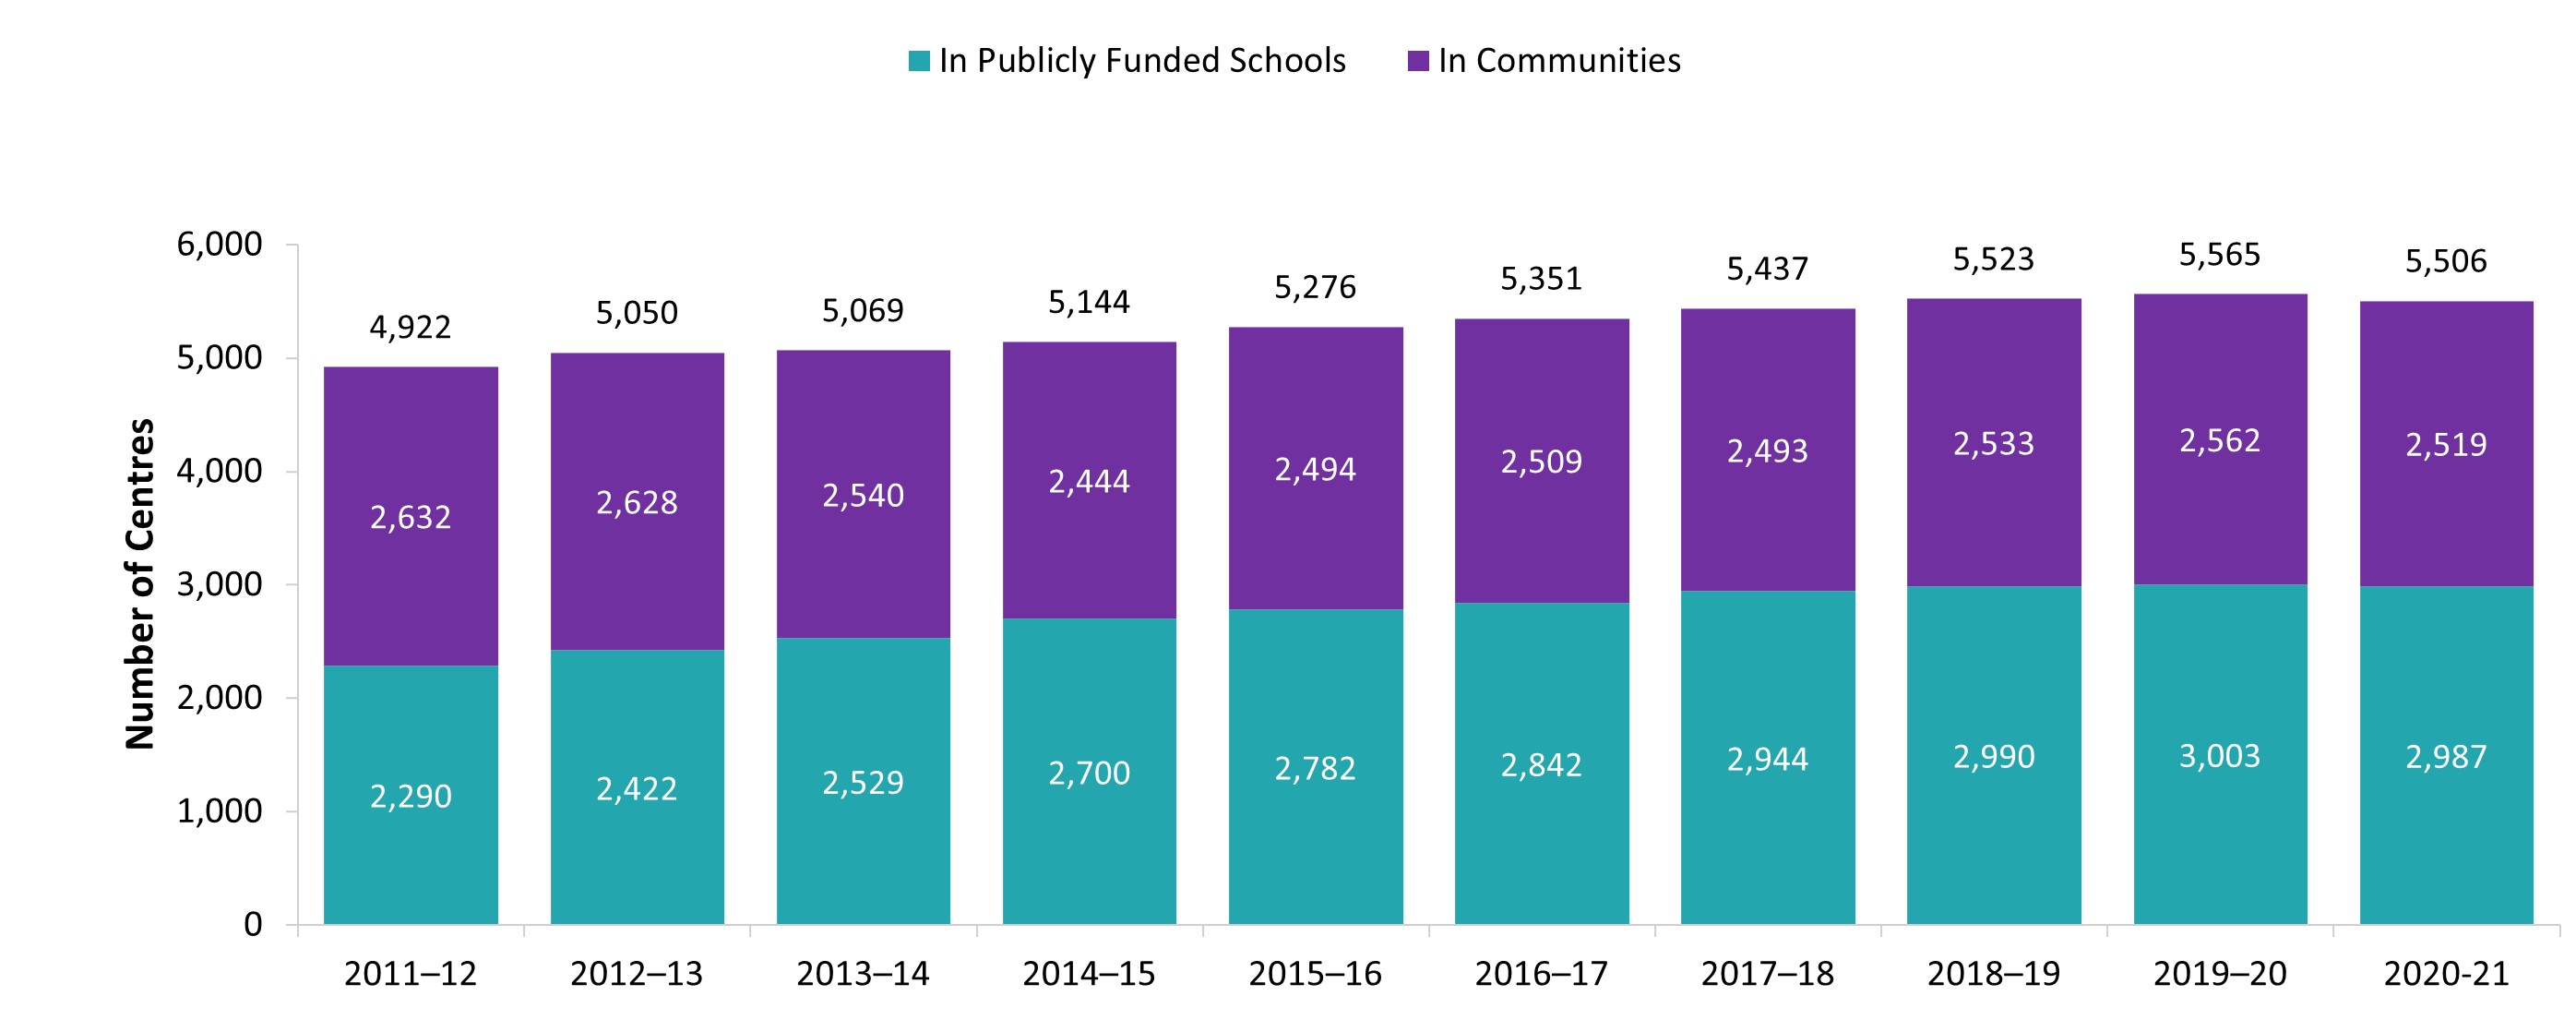 Licensed child care centres in publicly funded schools and in communities, 2011 to 2020-21